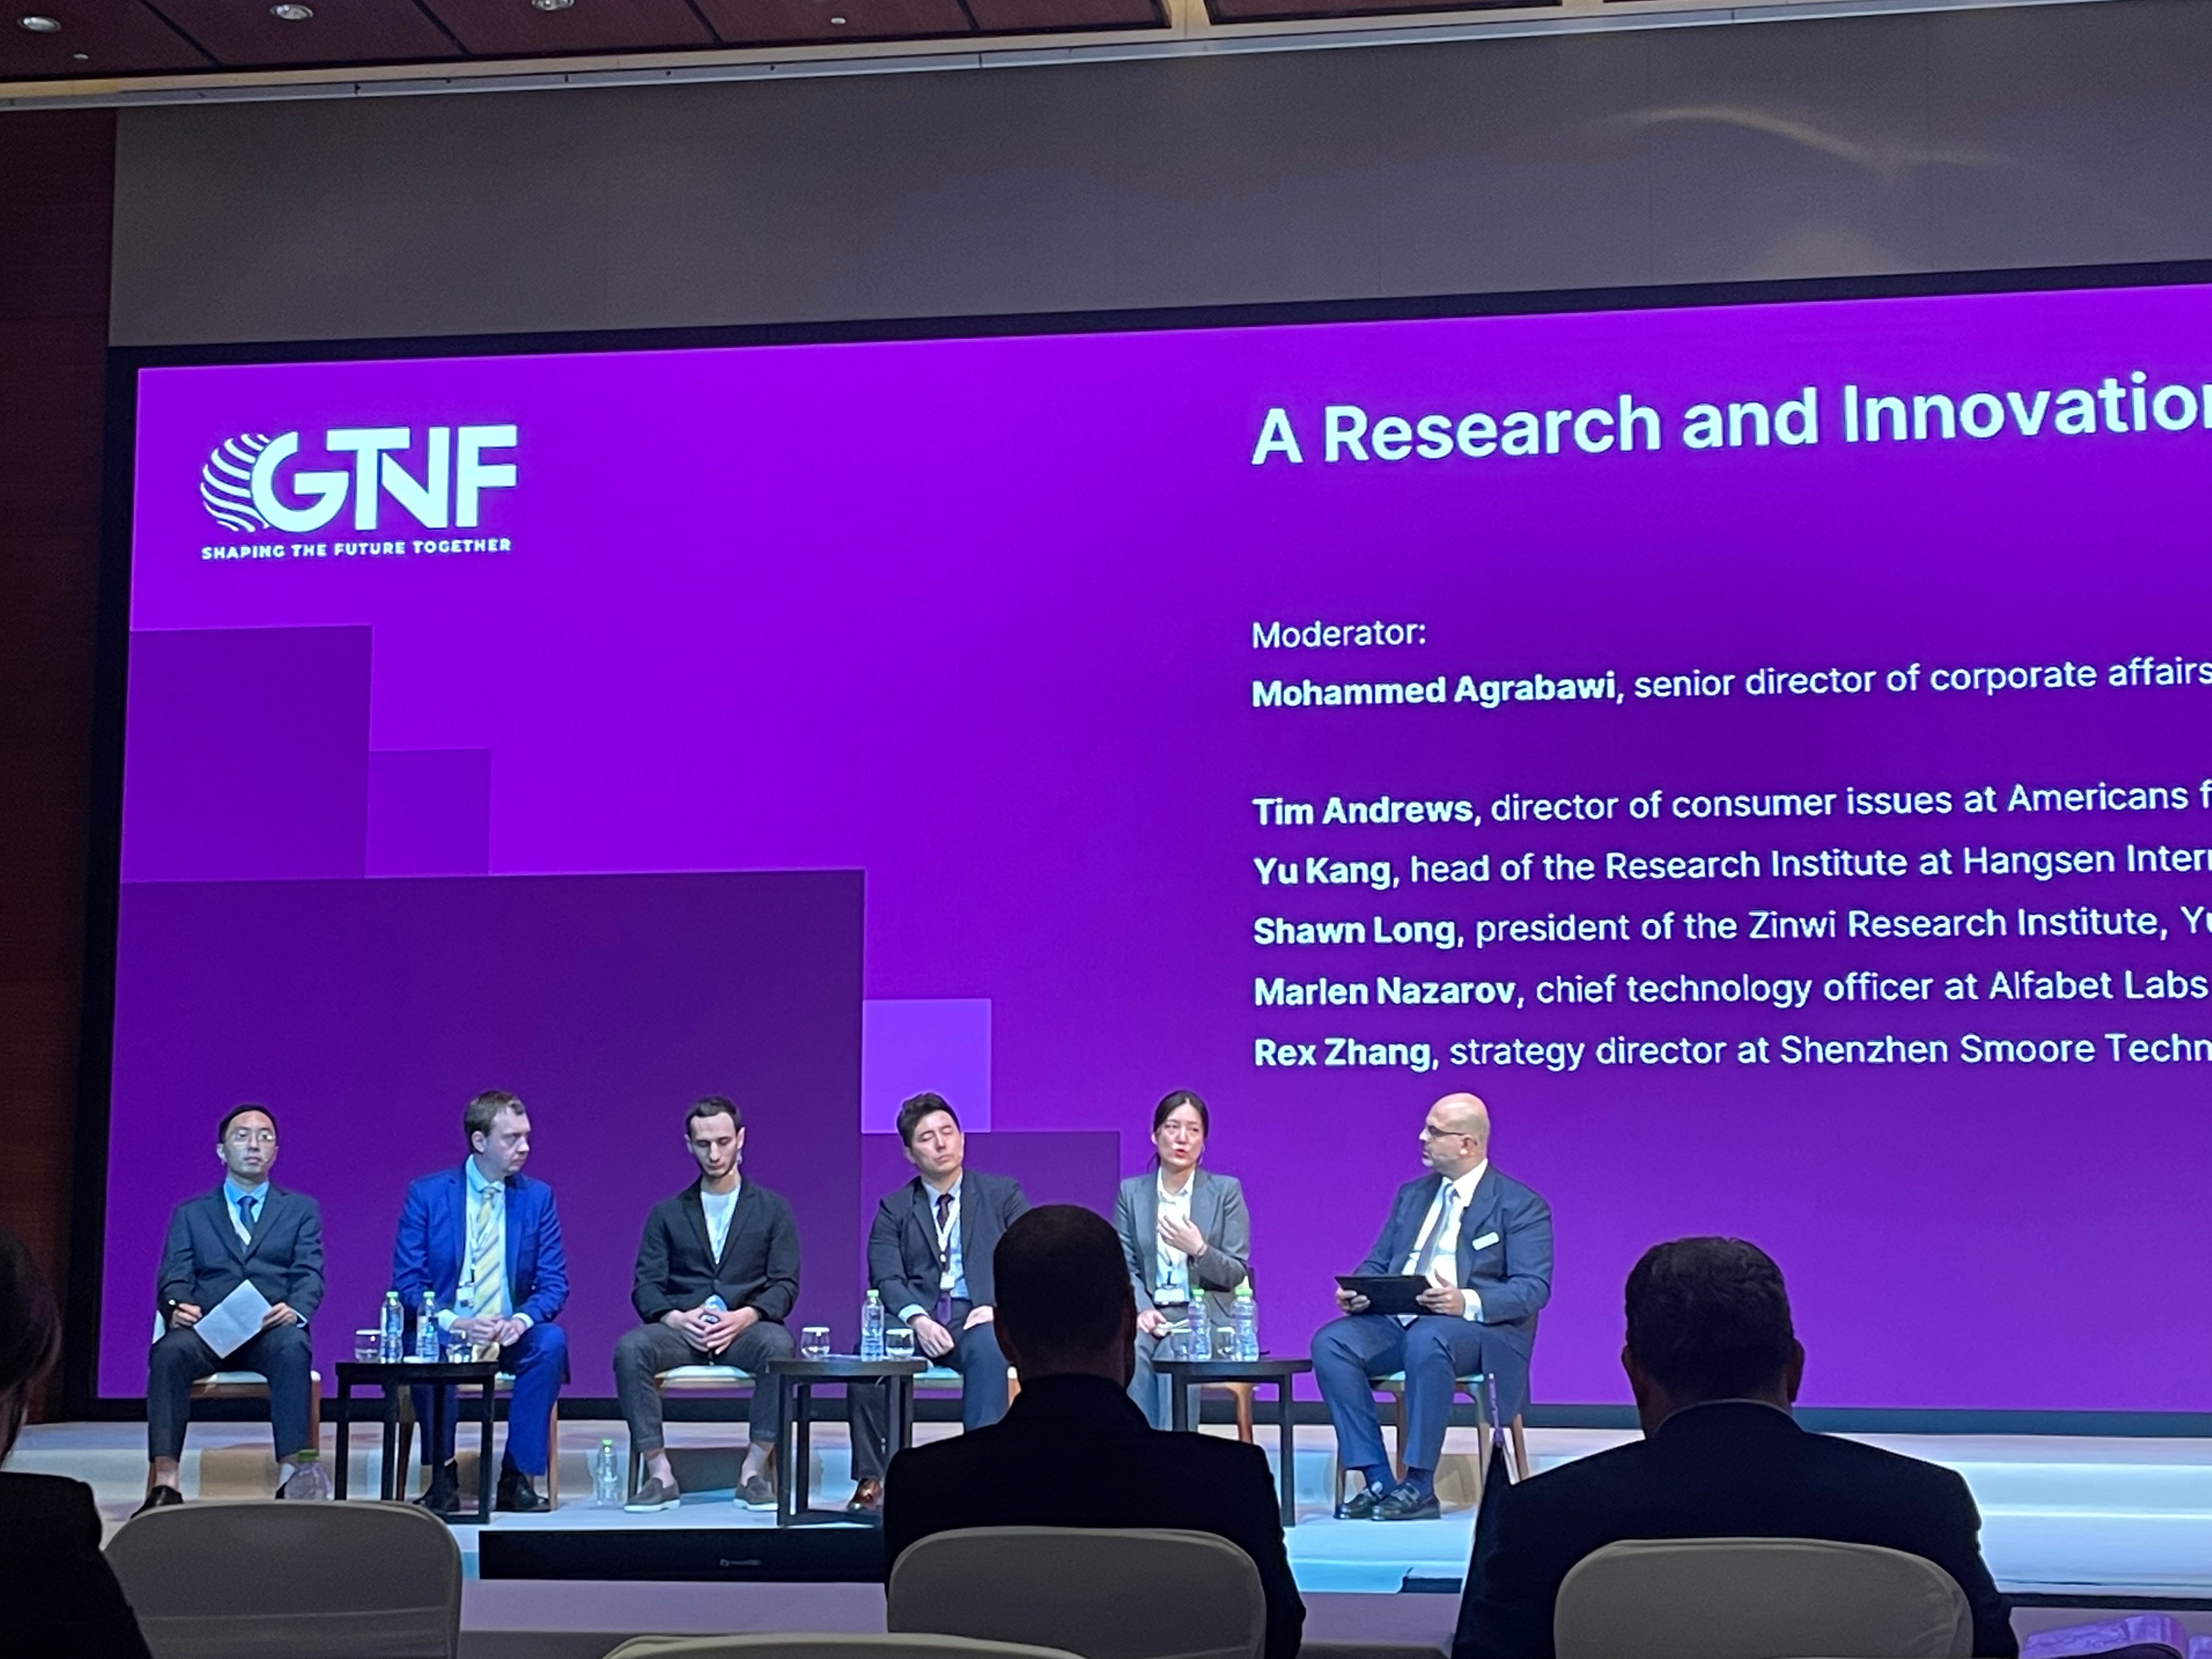 Panelists are seated on stage at the GTNF conference during a session on research and innovation, with the session's title and the names of the moderator and speakers displayed on the screen behind them.